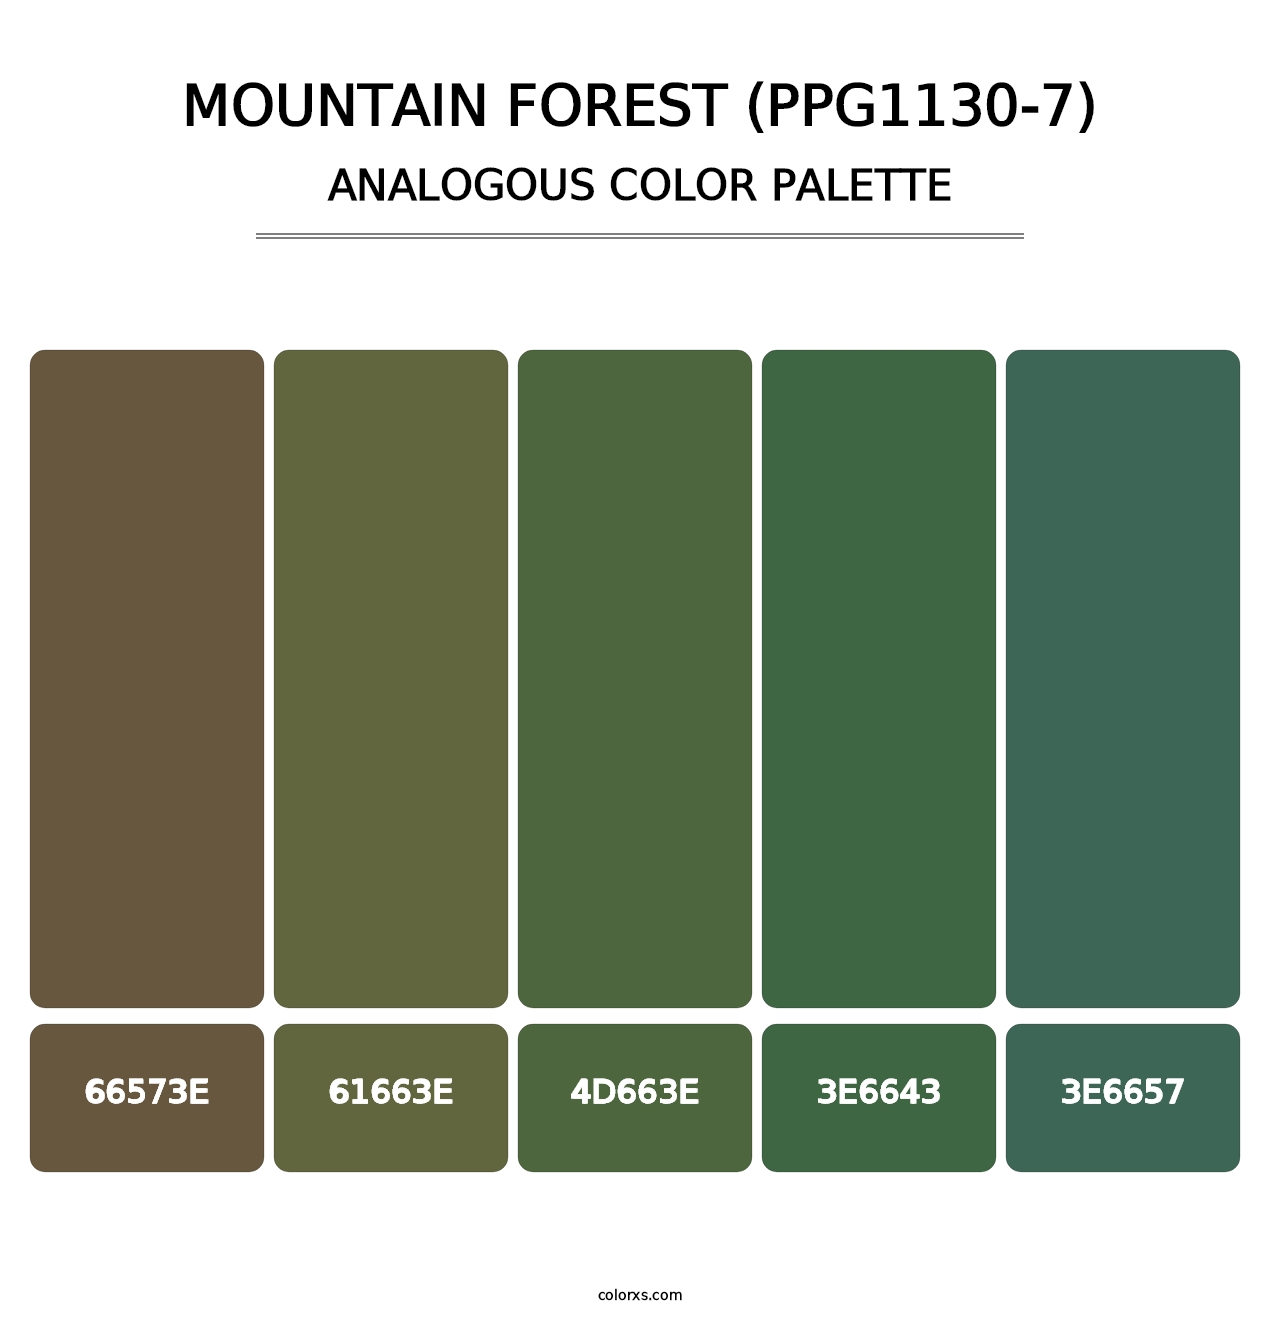 Mountain Forest (PPG1130-7) - Analogous Color Palette